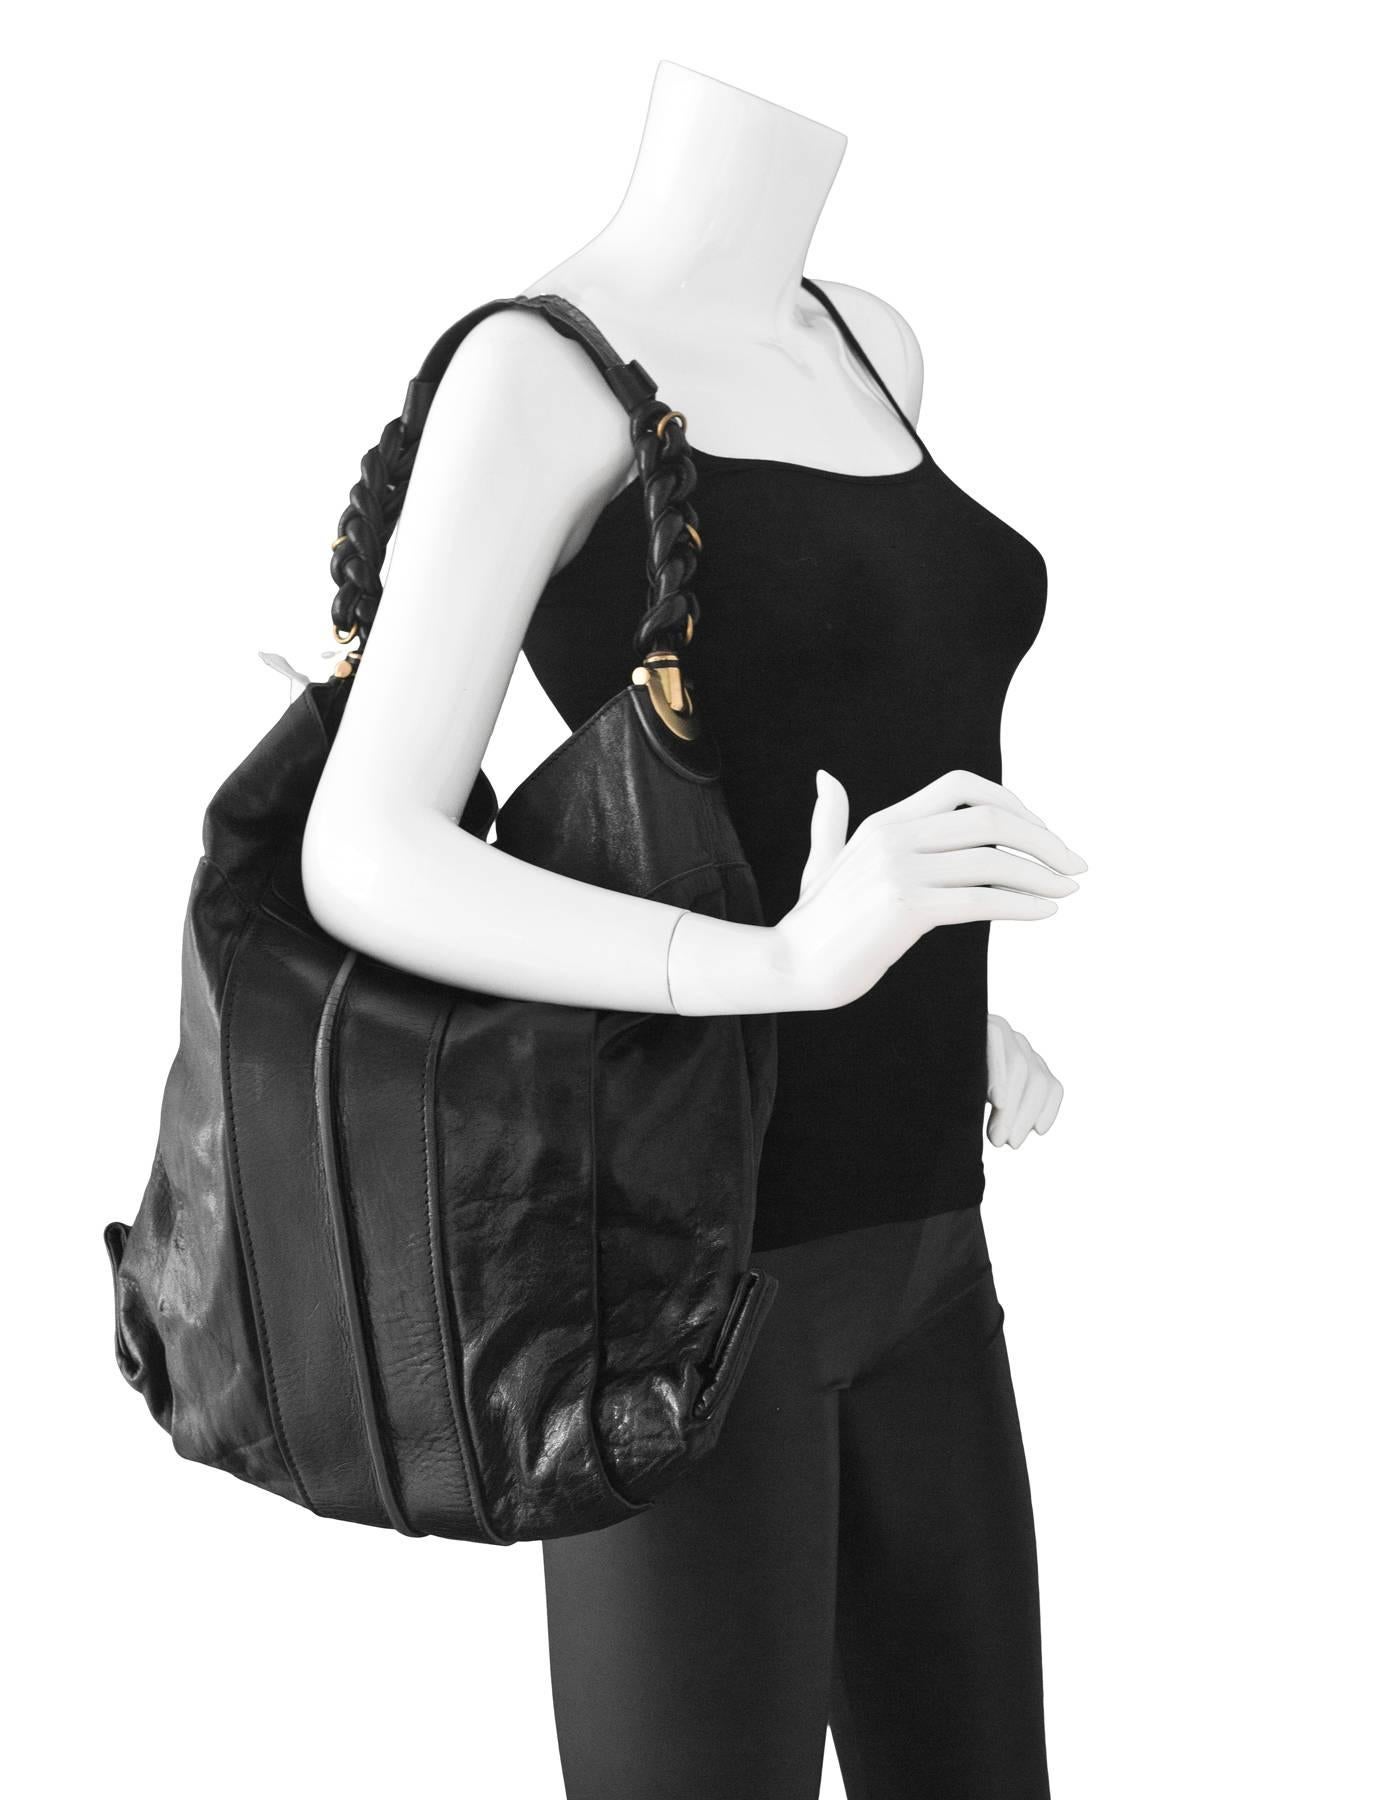 Chloe Black Leather Hobo

Made In: Italy
Color: Black
Hardware: Goldtone
Materials: Leather
Lining: Beige textile
Closure/Opening: Zip top with center snap
Exterior Pockets: Small snap card compartment
Interior Pockets: One wall pocket, one zip